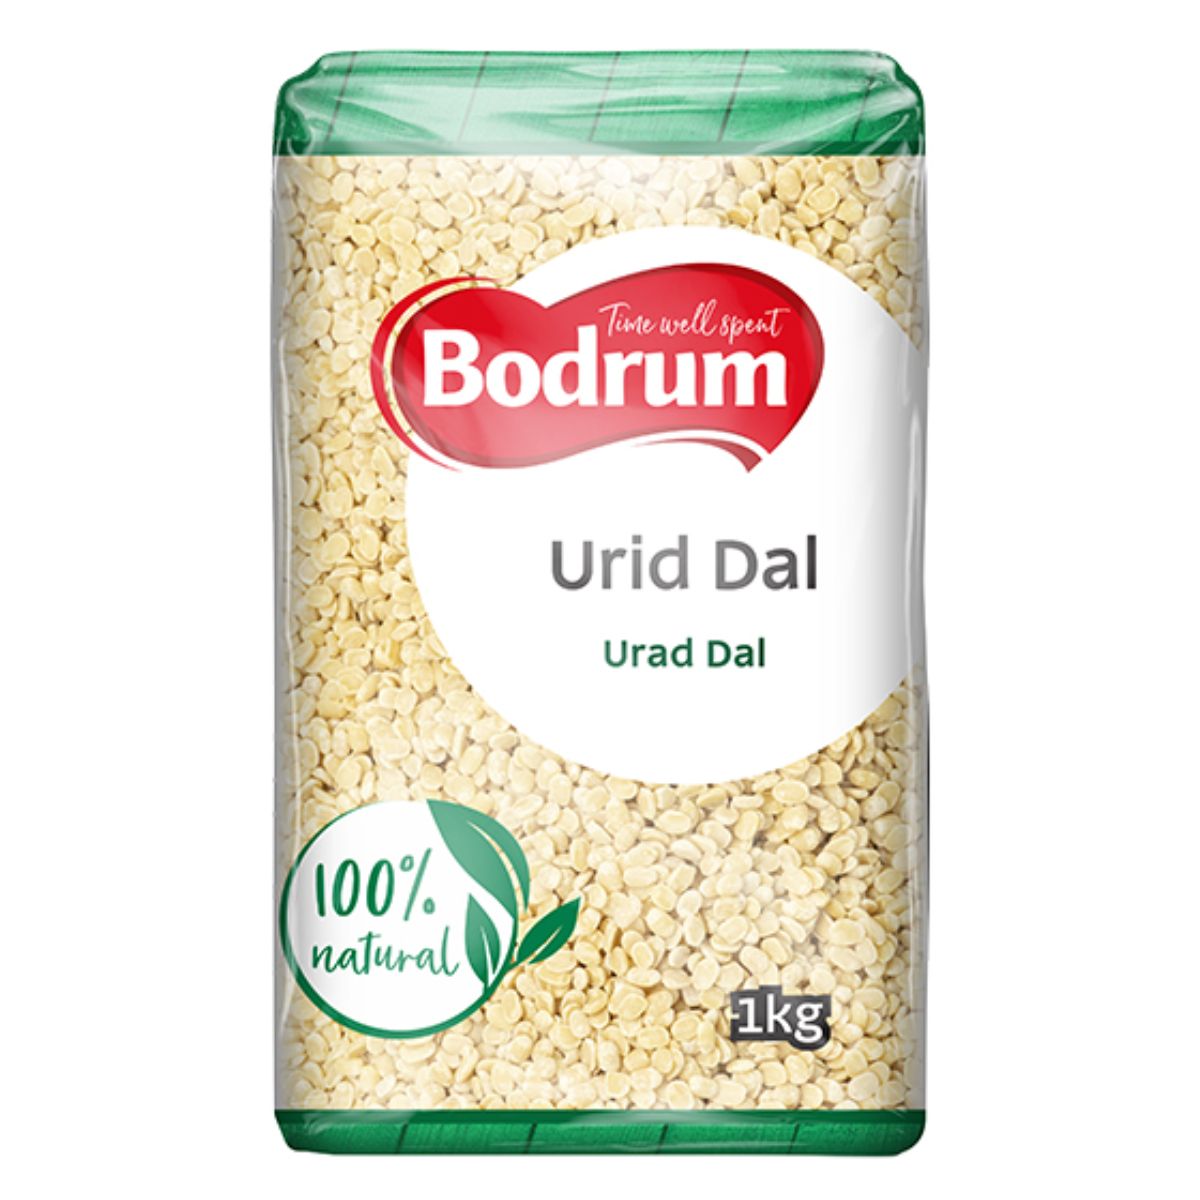 A bag of Bodrum - Urid Dal - 1kg on a white background.